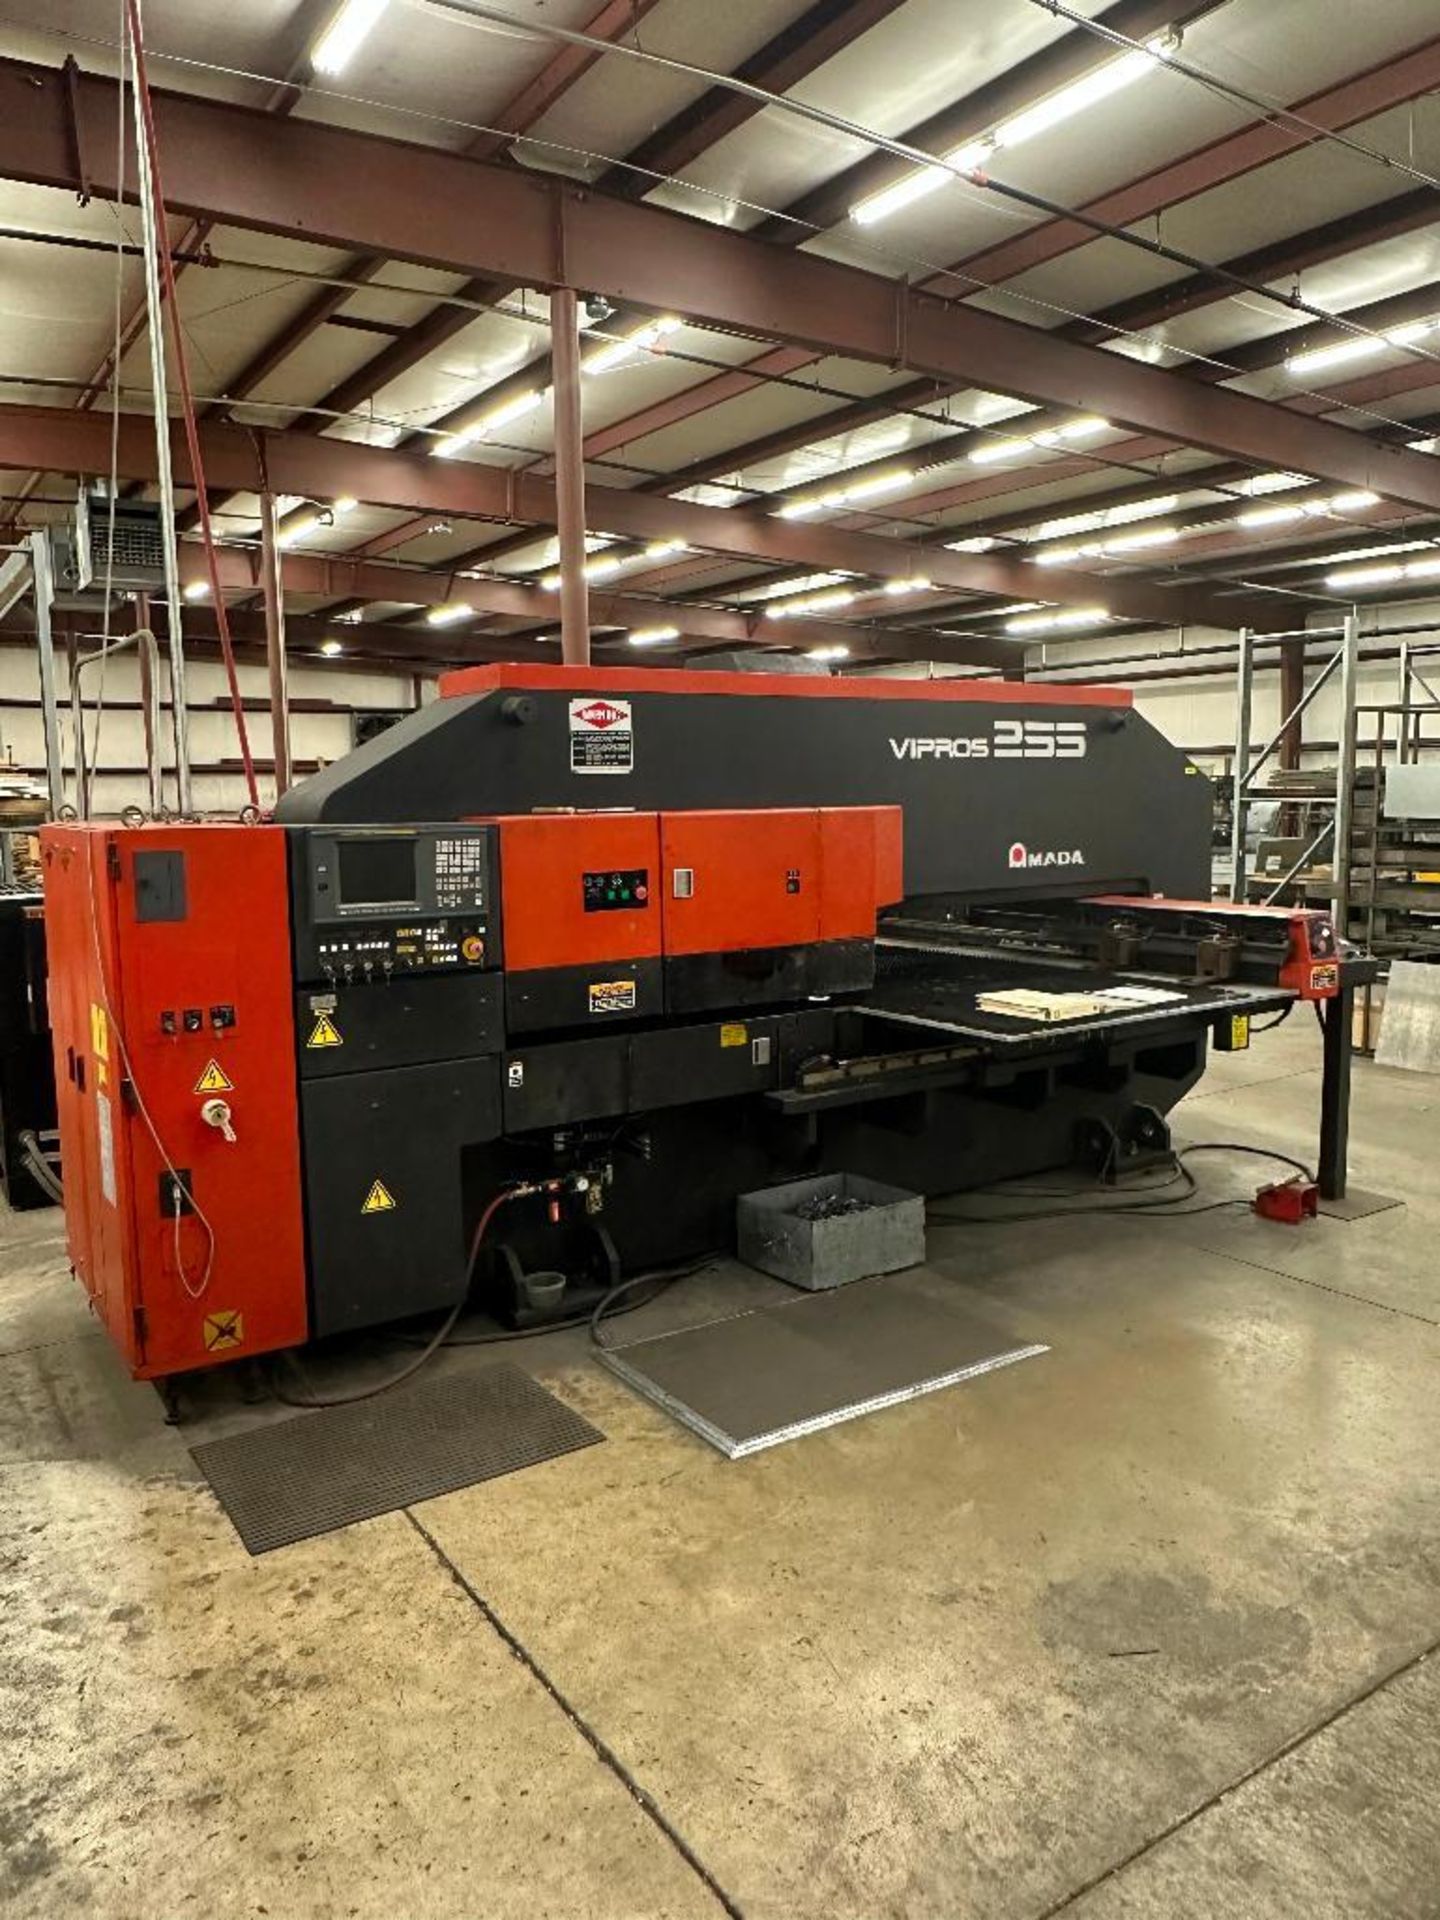 Amada Vipros 255 CNC Turret 20 Ton Press WITH SBC CHILLER AND FULL WORK TABLE OF PARTS AND ACCESSORI - Image 4 of 70